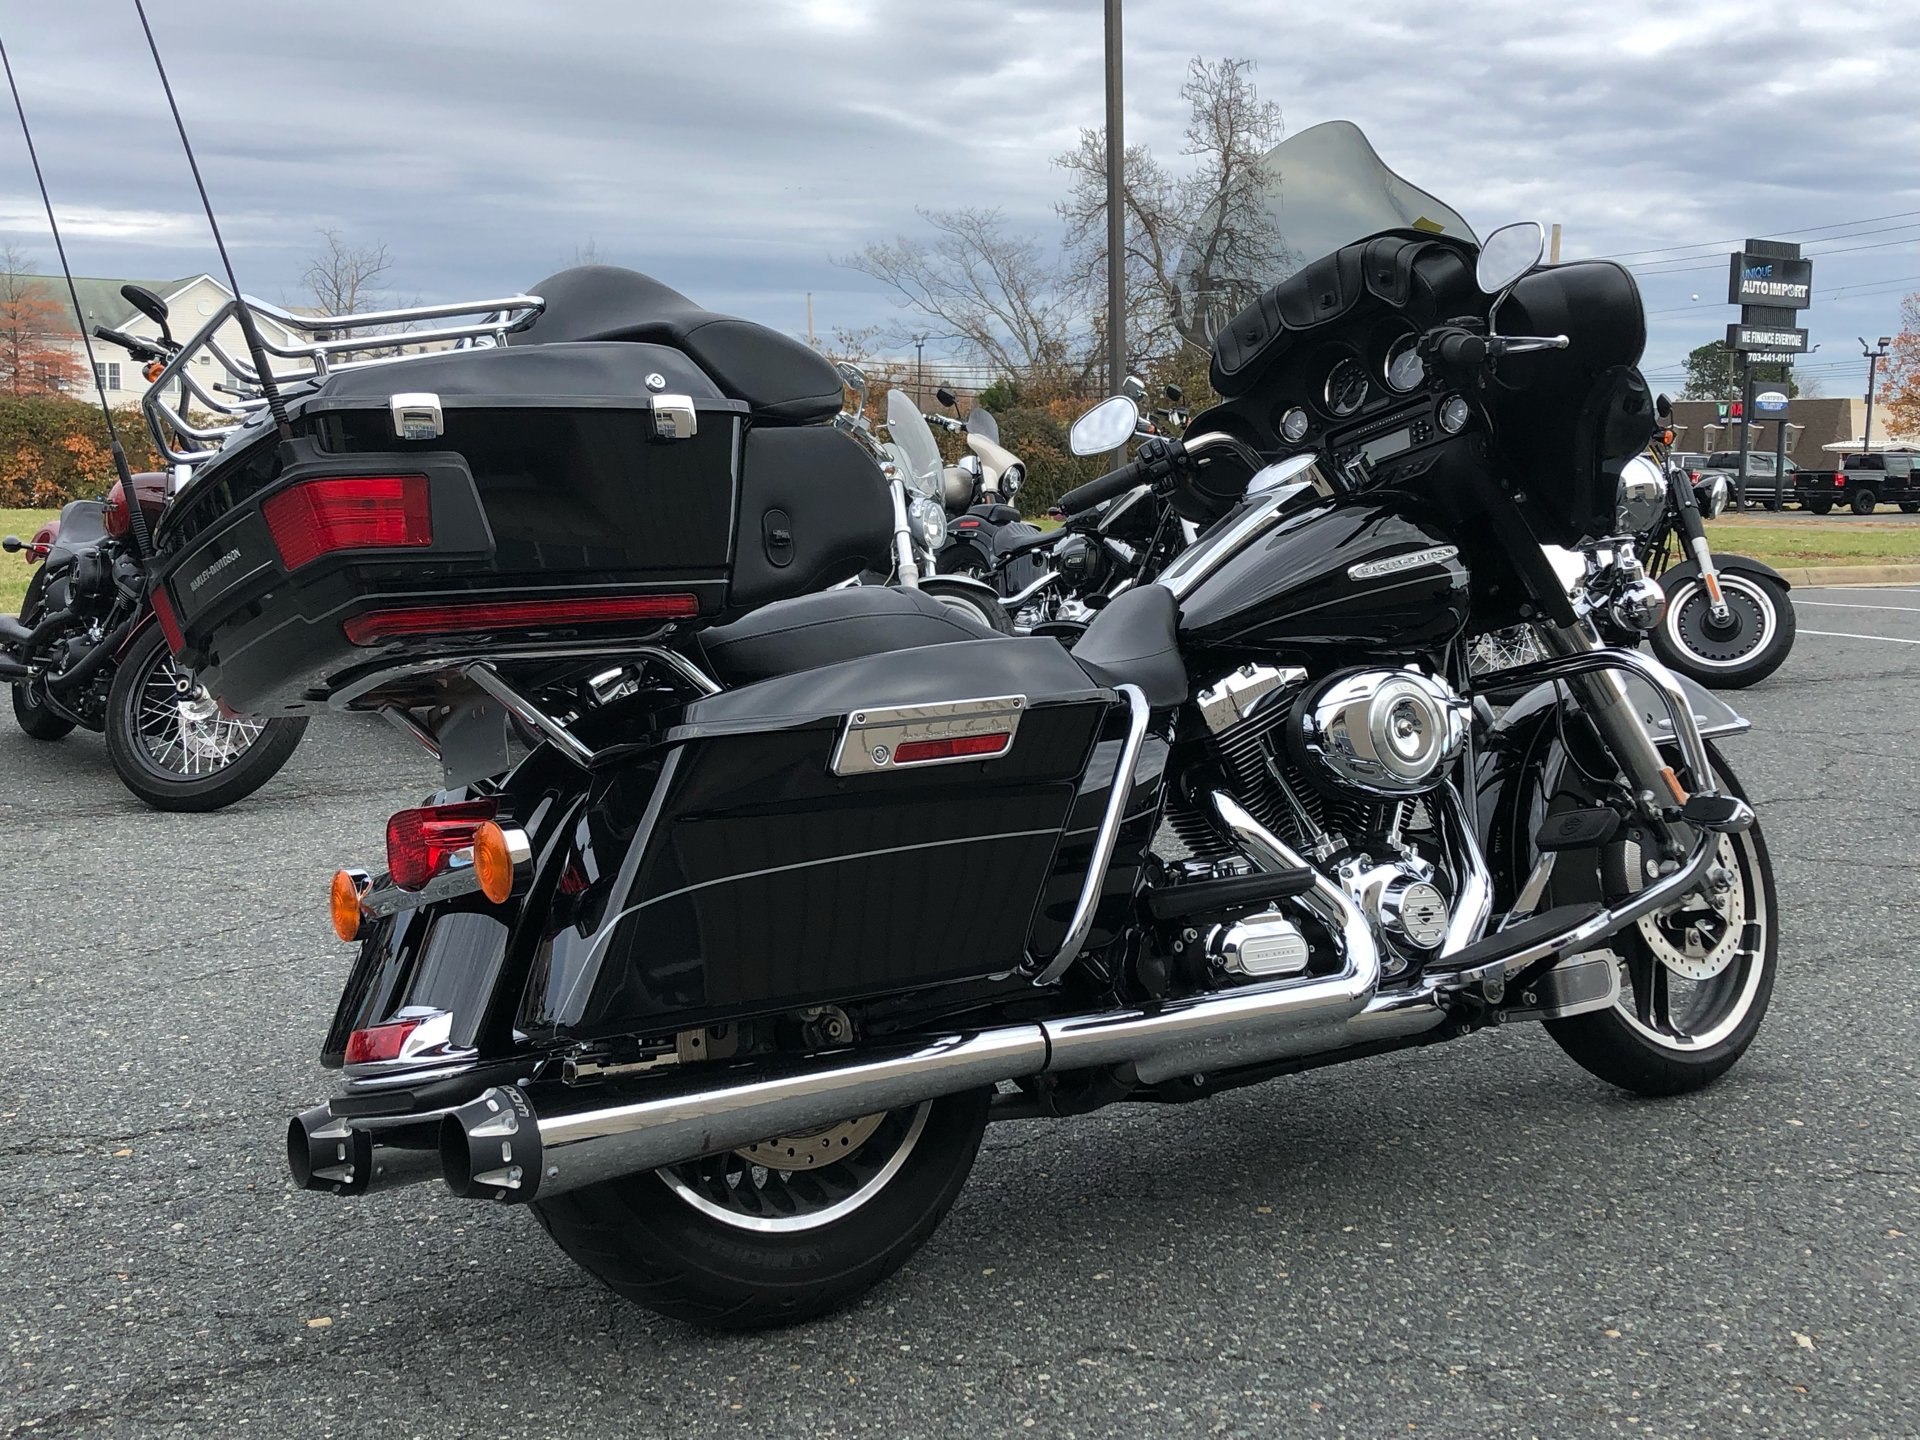 2012 Harley-Davidson Electra Glide® Ultra Limited in Dumfries, Virginia - Photo 3